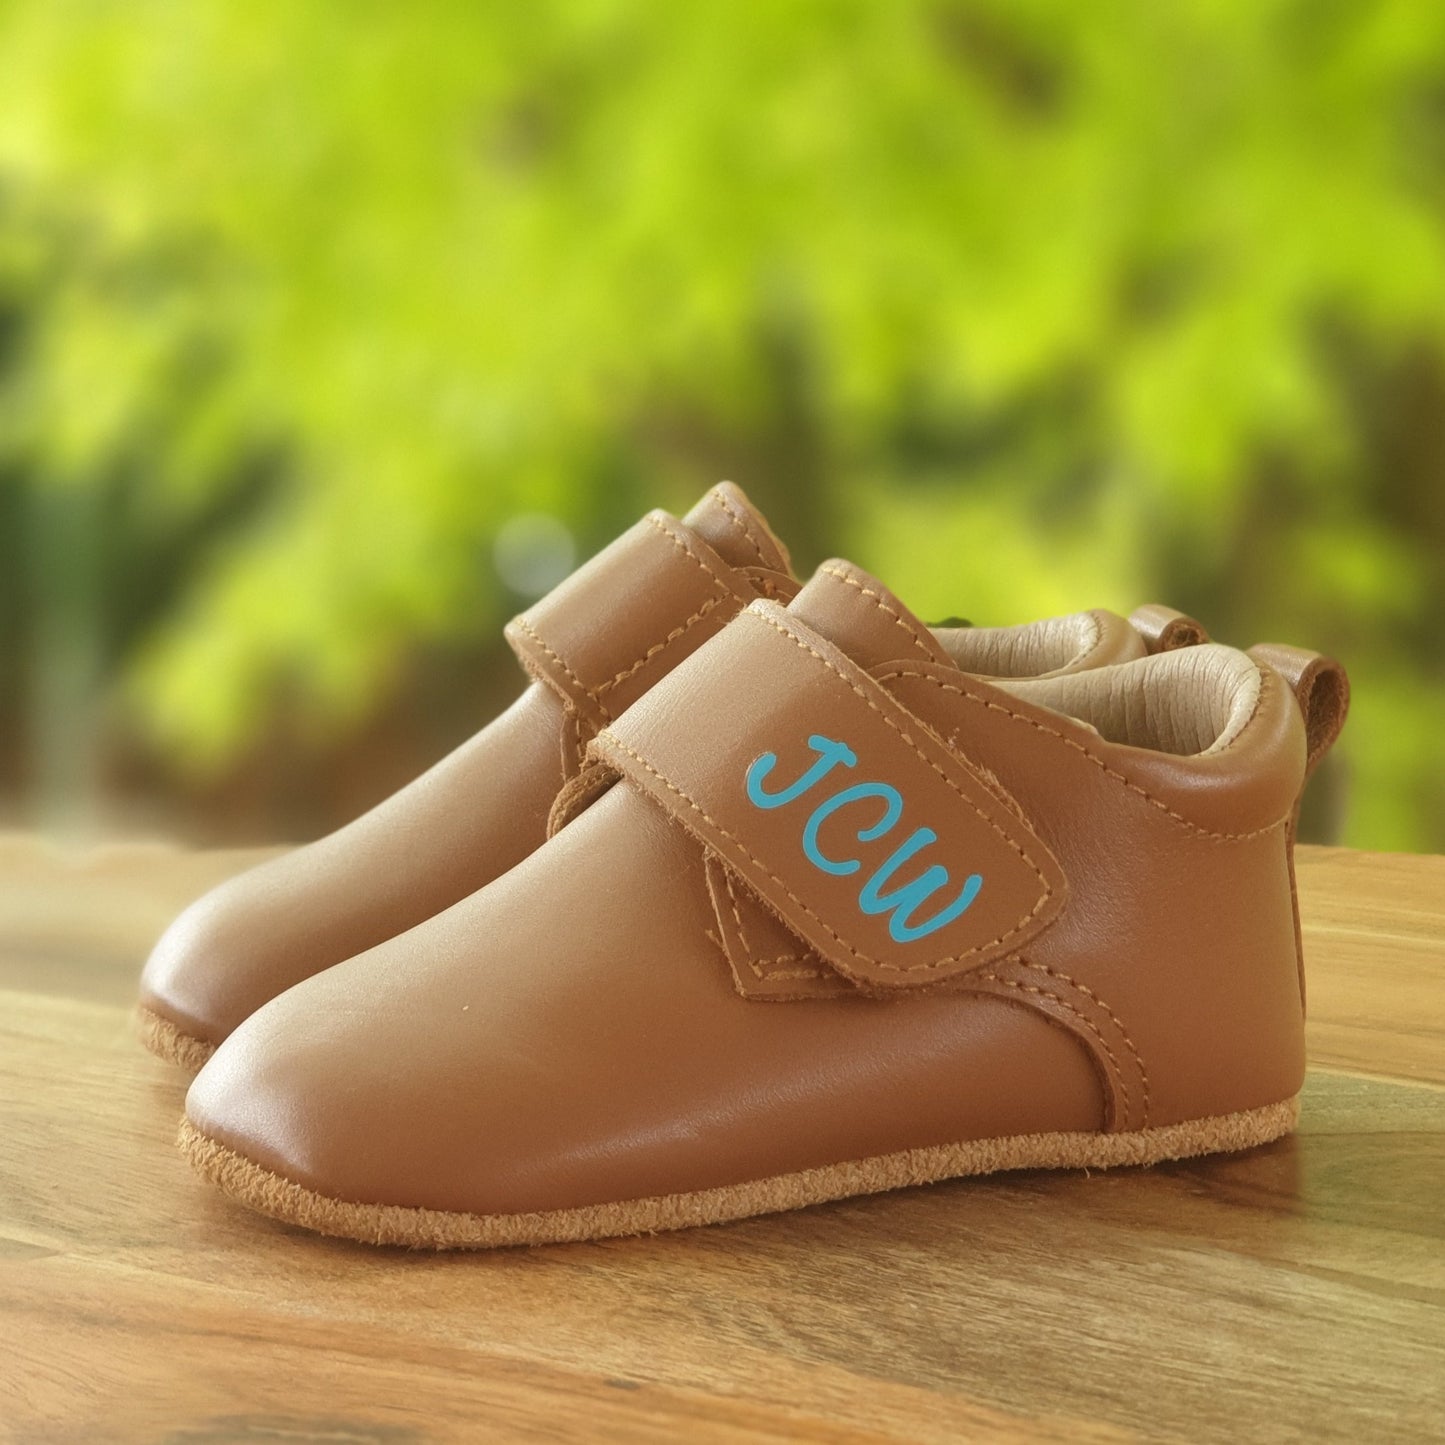 Baby Leather shoes